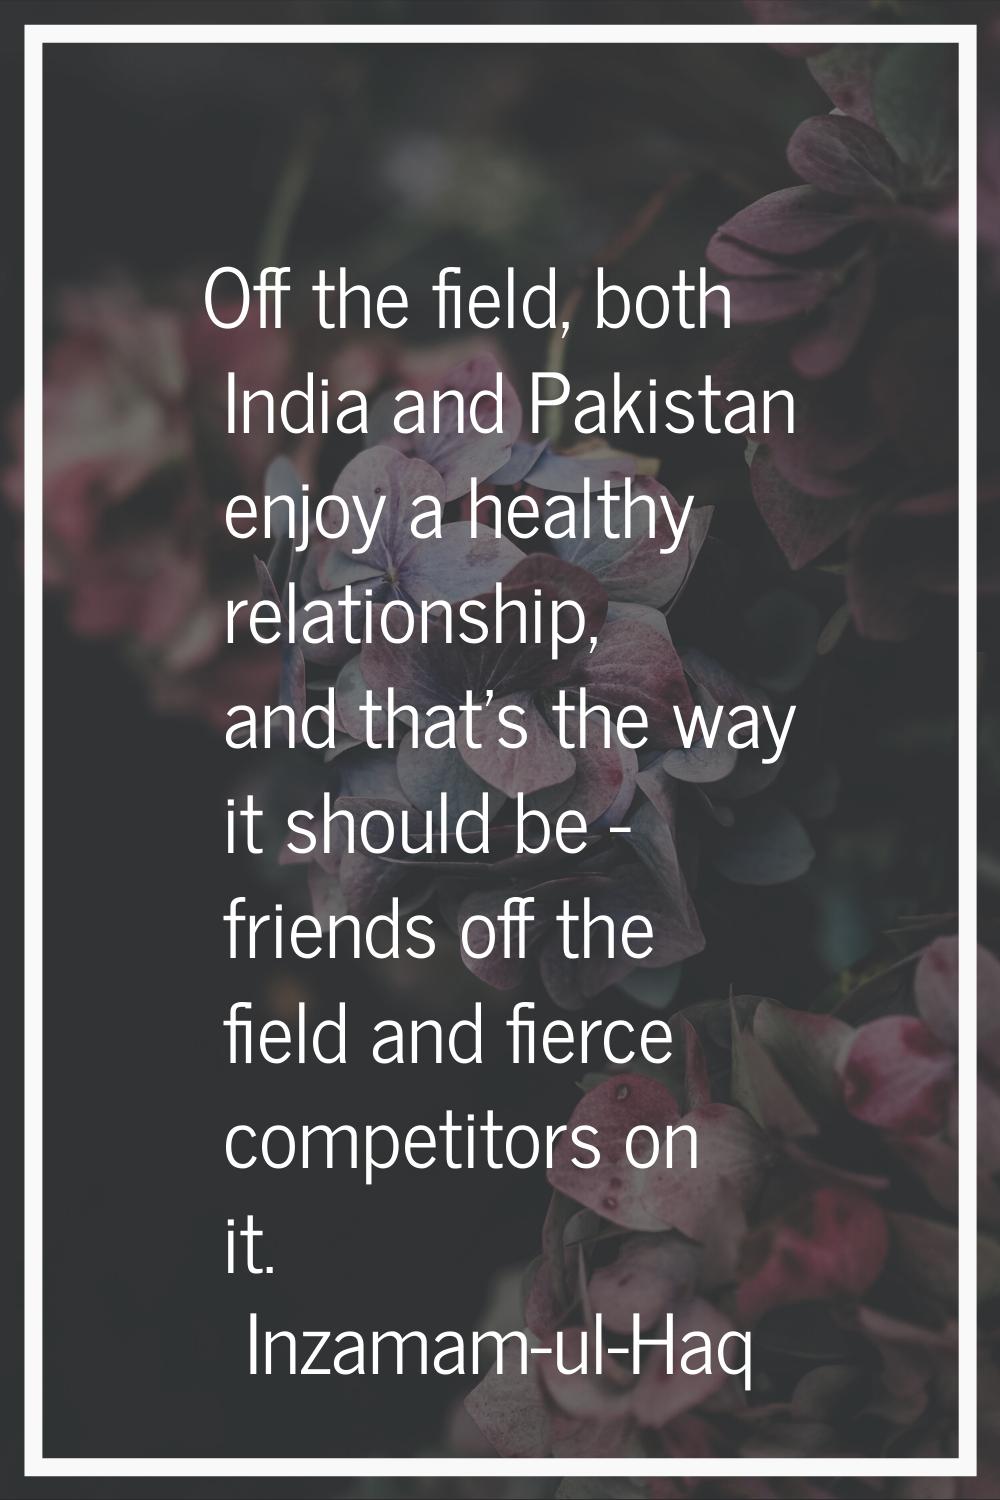 Off the field, both India and Pakistan enjoy a healthy relationship, and that's the way it should b